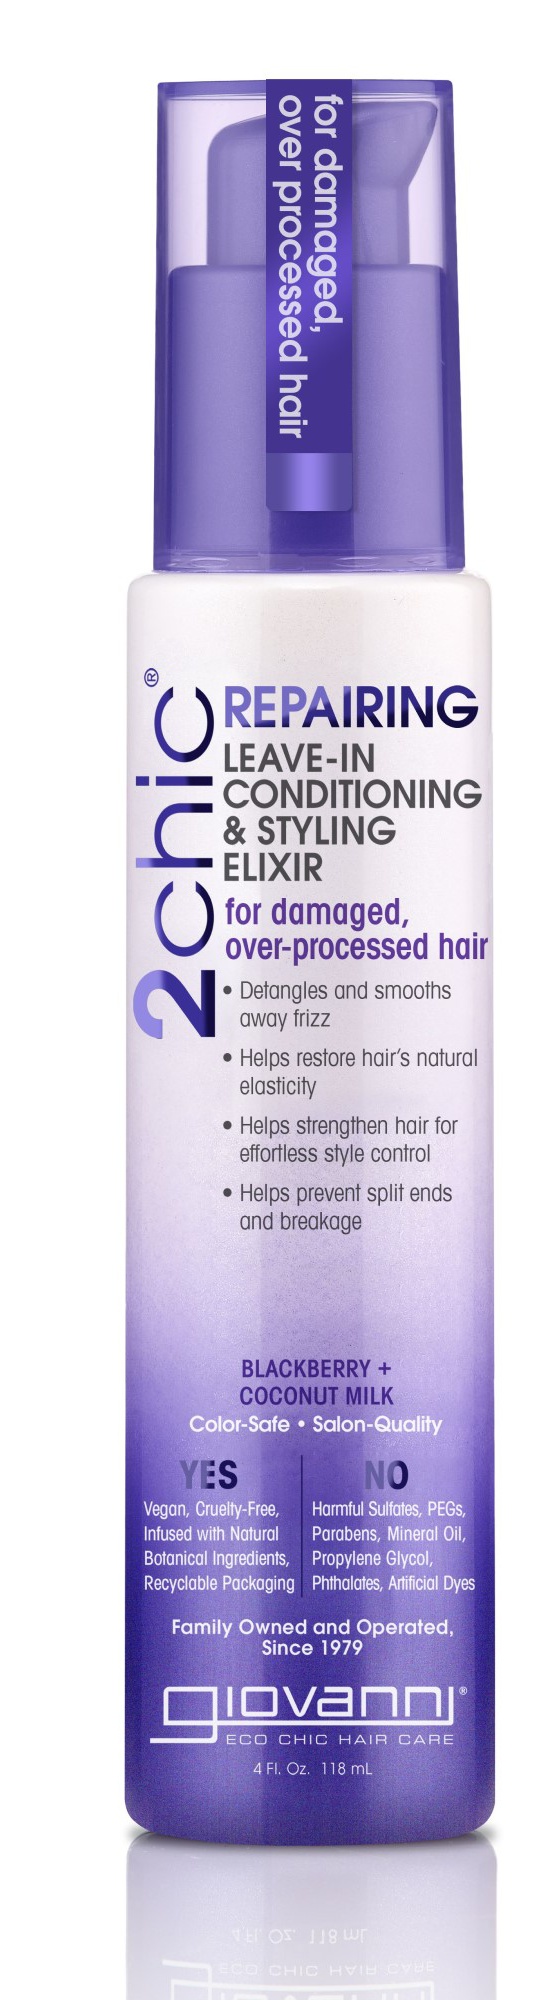 Giovanni 2Chic Repairing Leave-In Conditioning & Styling Elixir